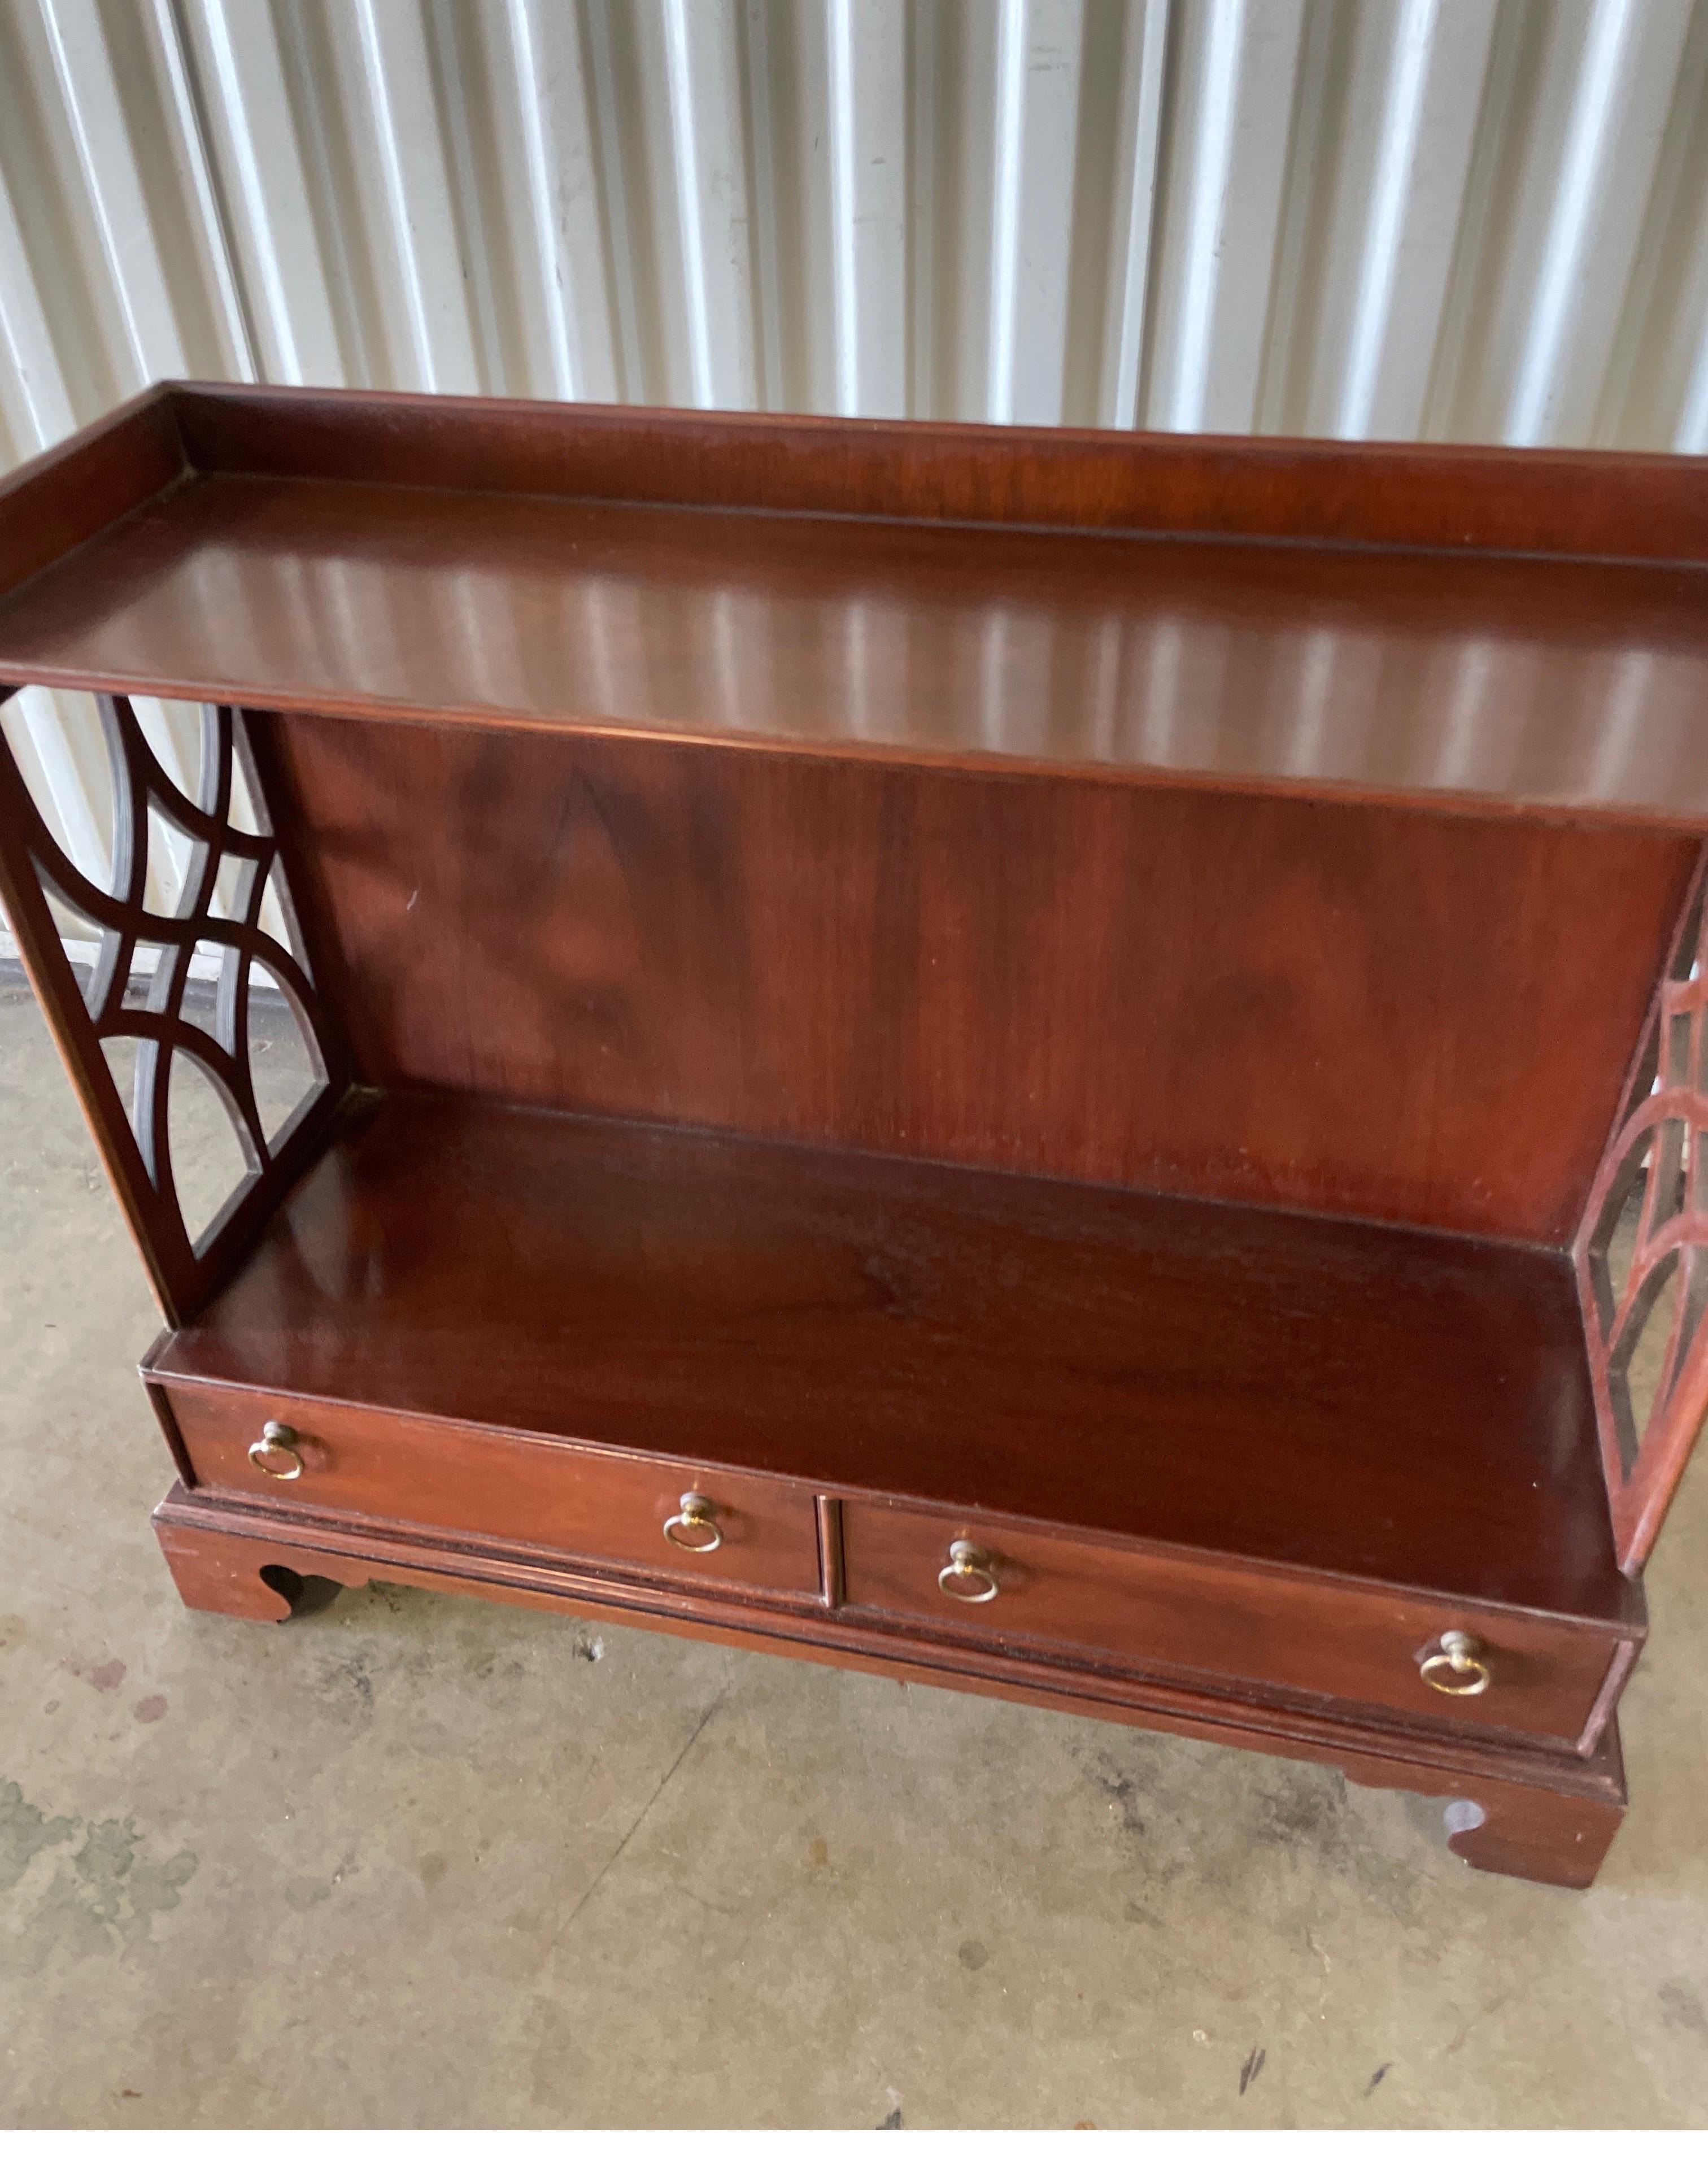 Vintage Chippendale style whatnot by Baker Furniture company. Fretwork sides and two drawers.